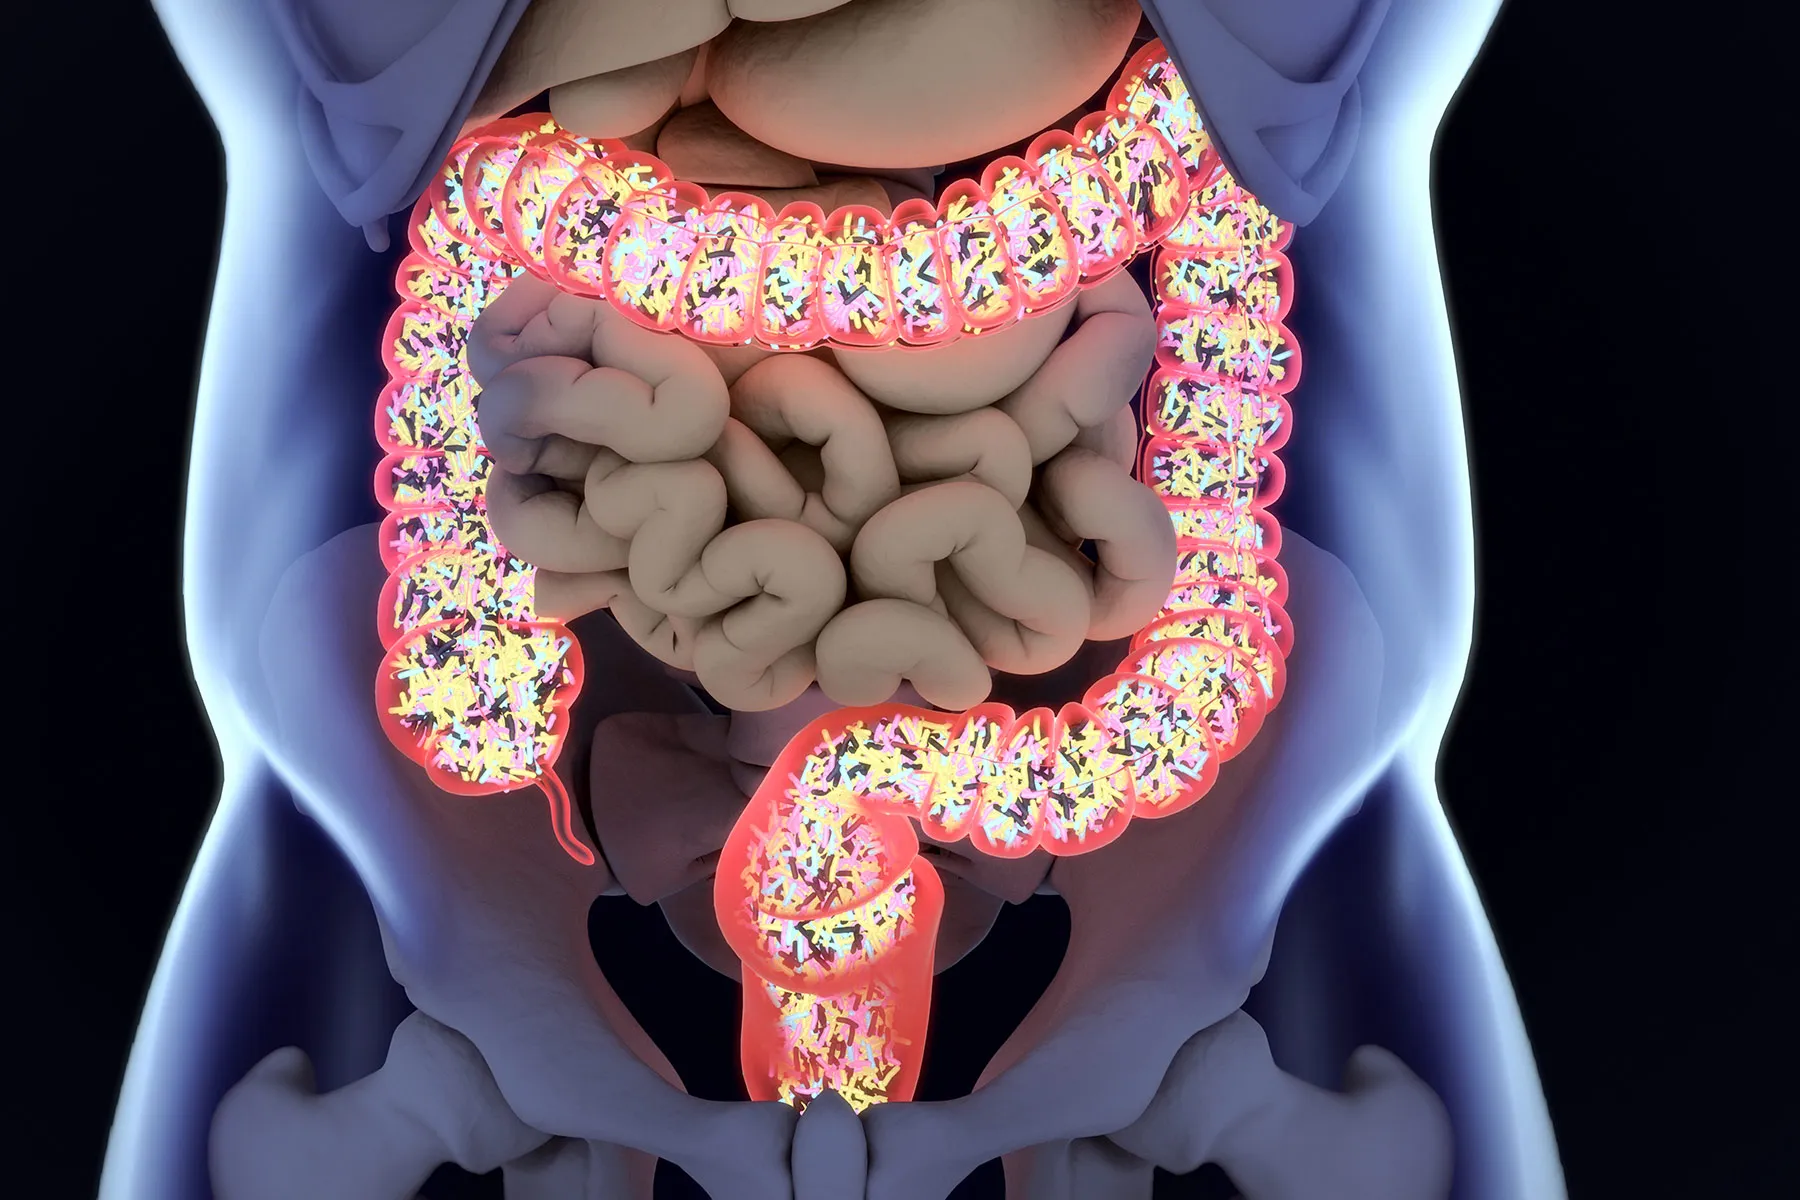 COVID infection disrupts the gut microbiome